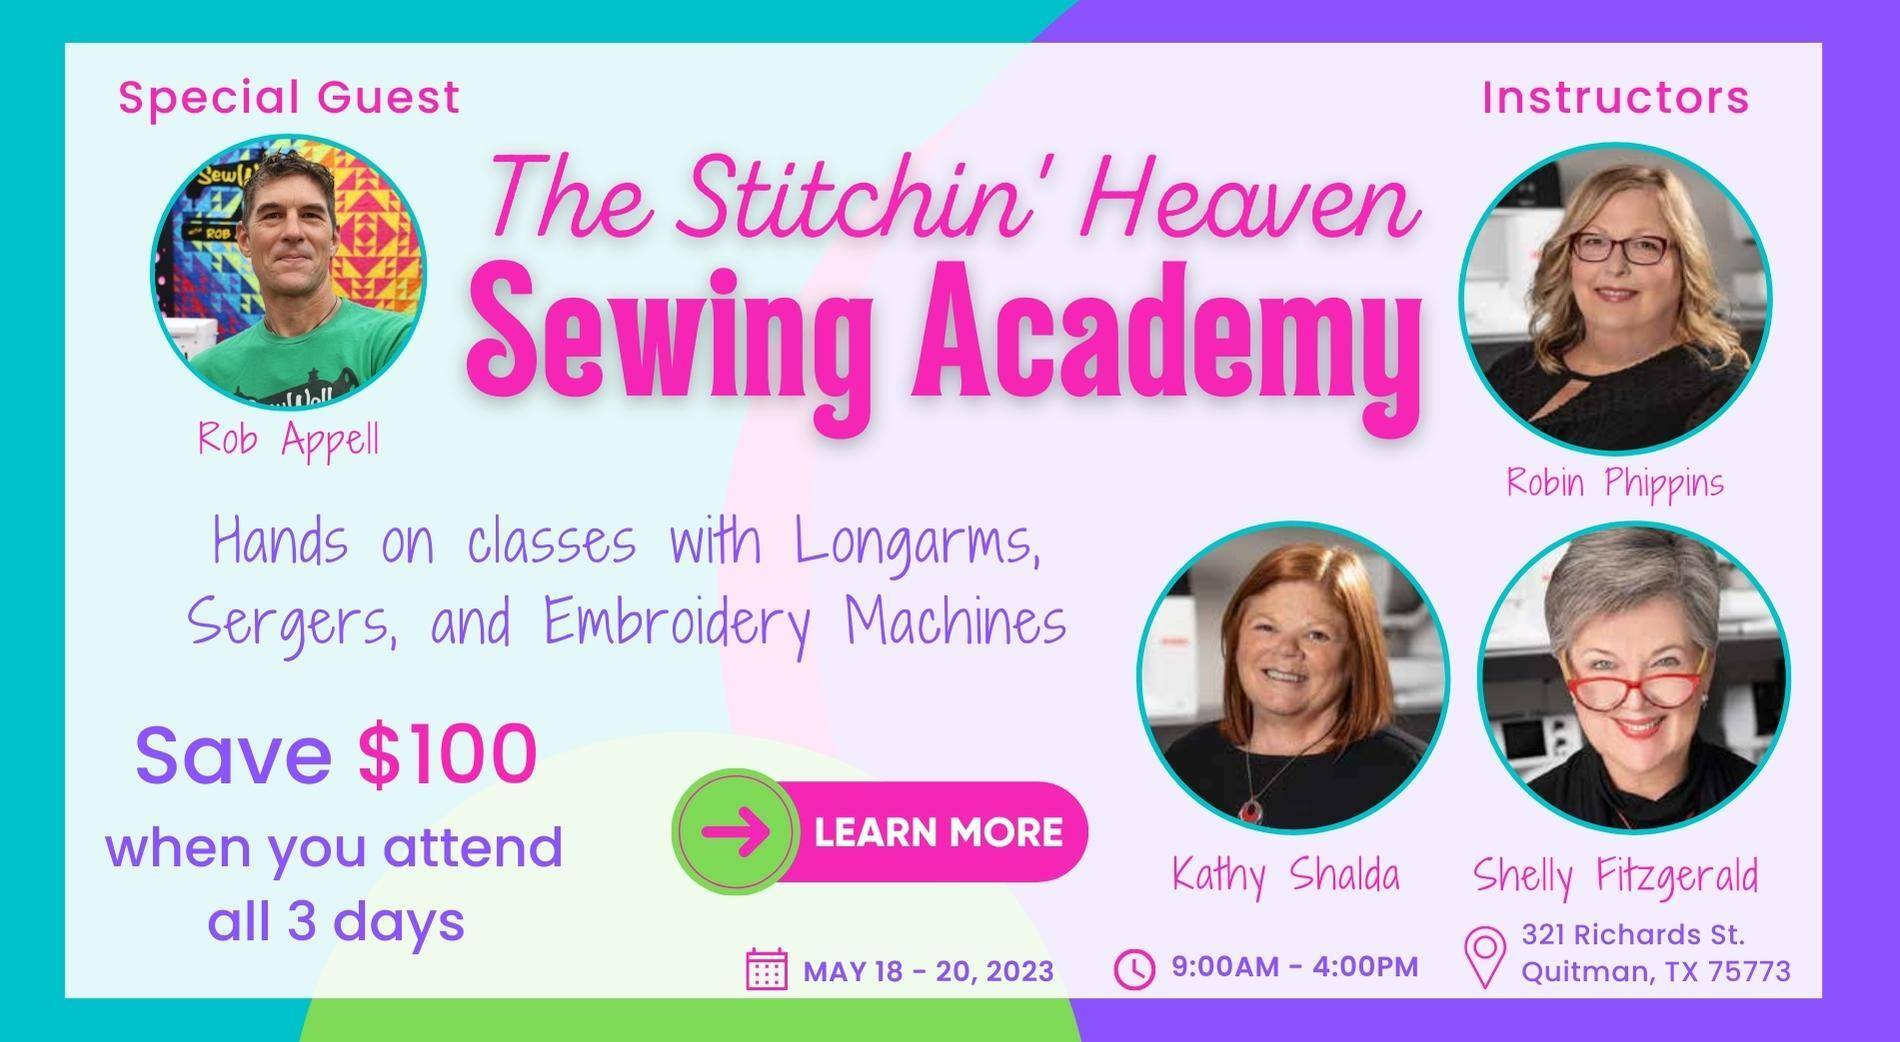 Stitchin' Heaven Sewing Academy Instructors and Guests